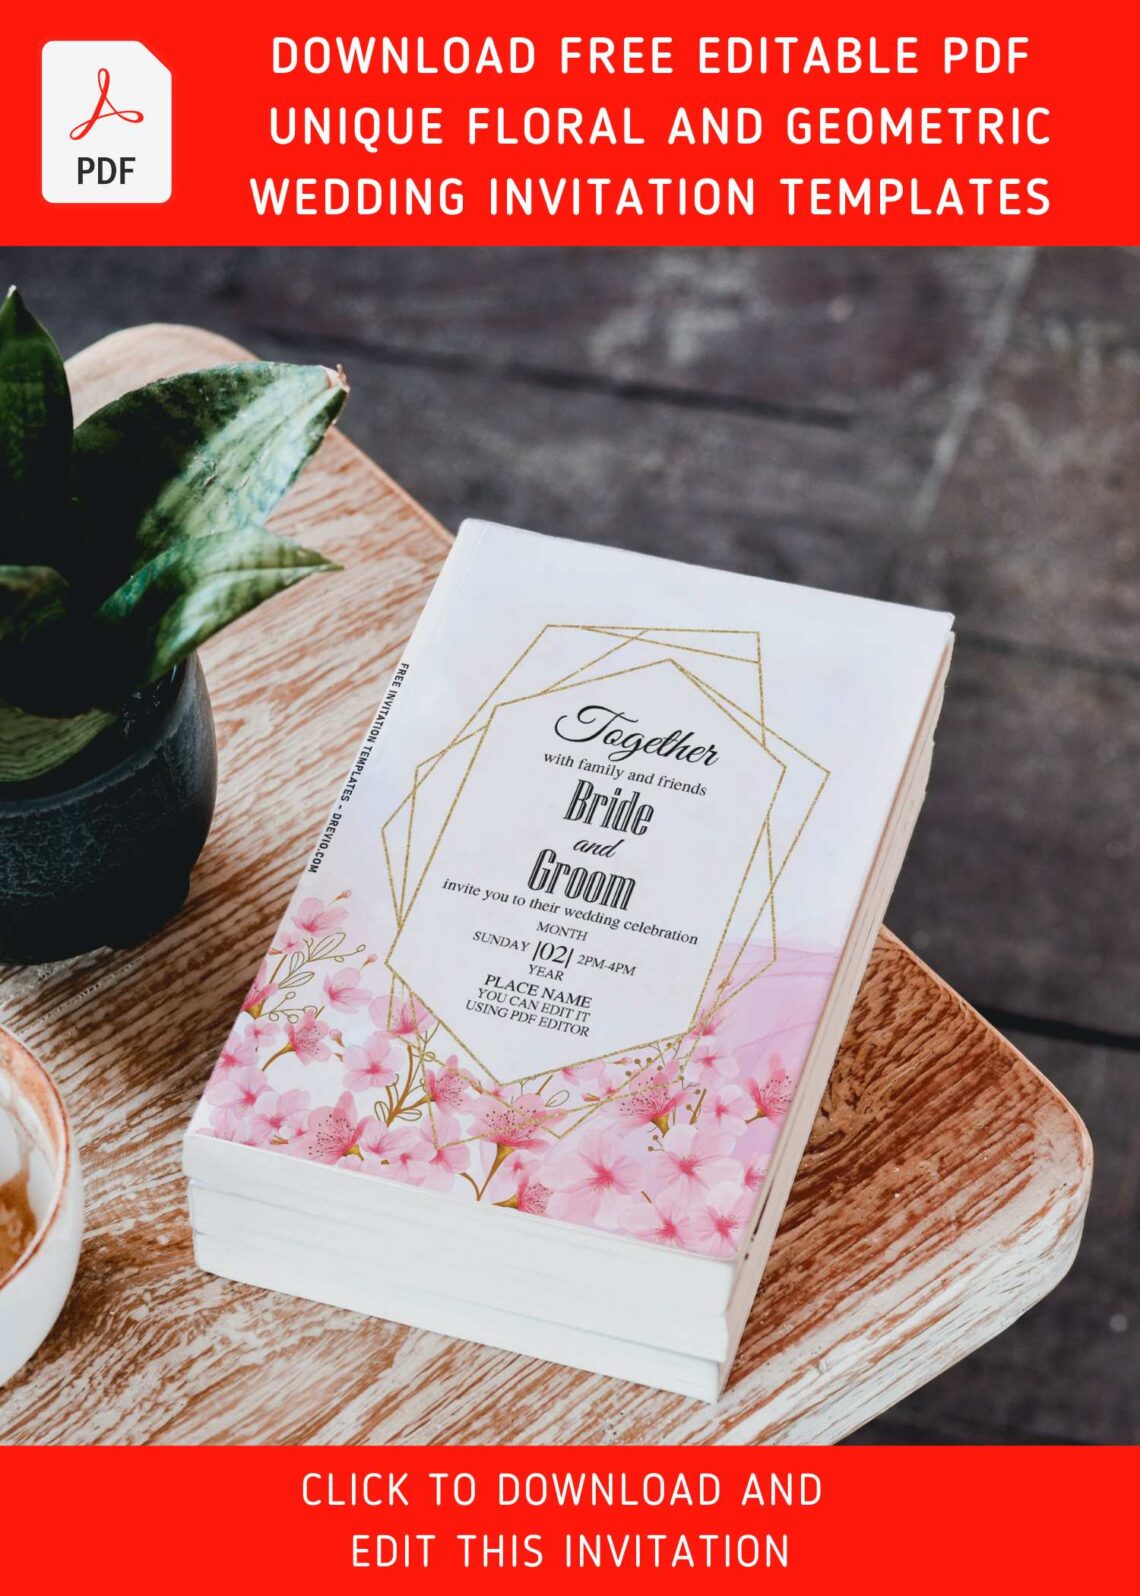 (Free Editable PDF) Unique Floral And Geometric Wedding Invitation Templates with editable text